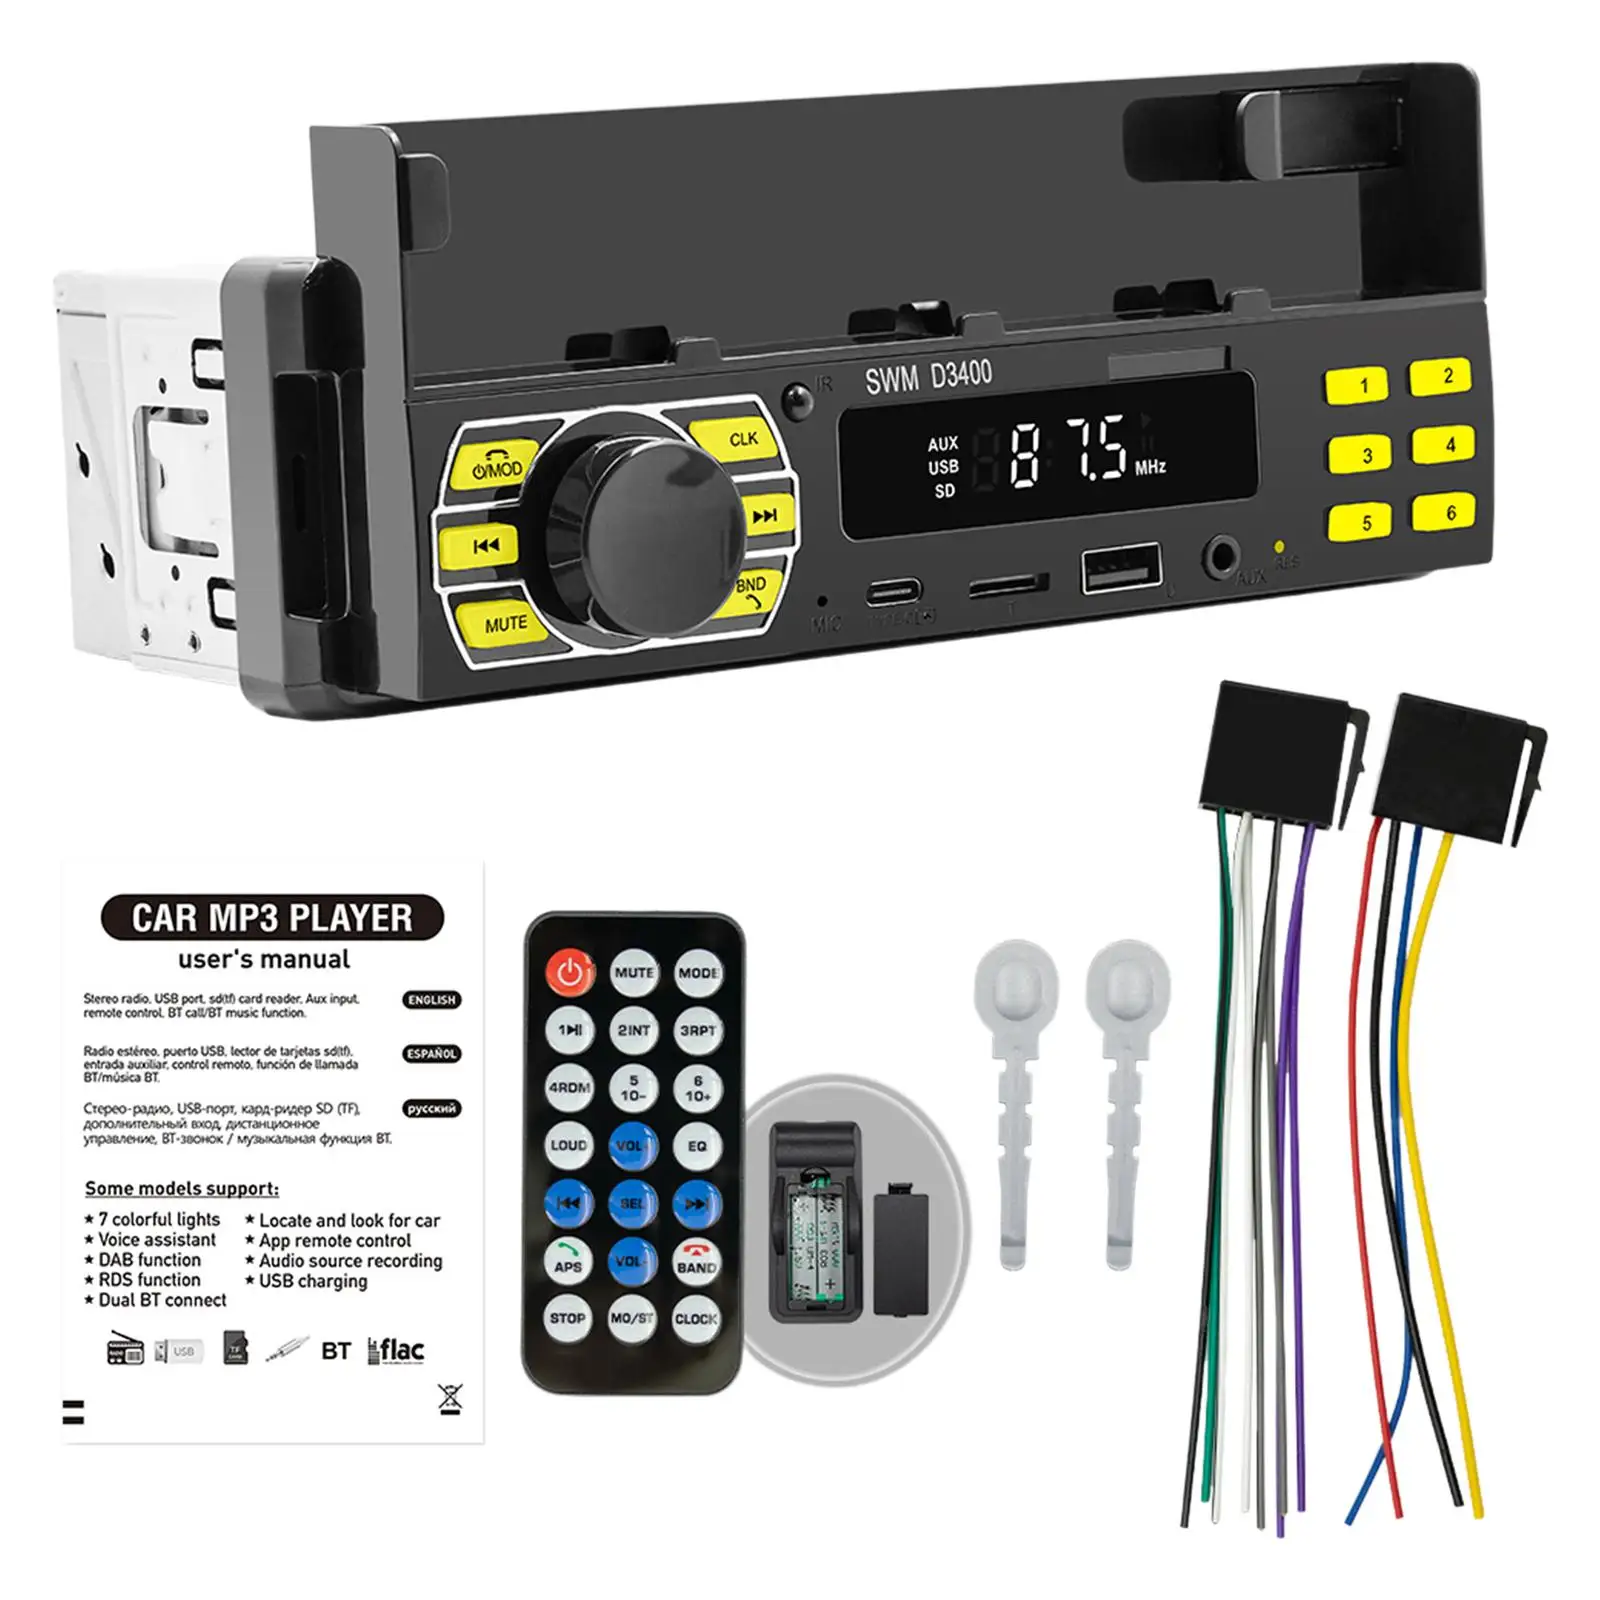 Car Stereo 2 Channels 7 Color Button with Phone Mount AUX in Handsfree Call TF Card FM Radio Receiver for Trucks